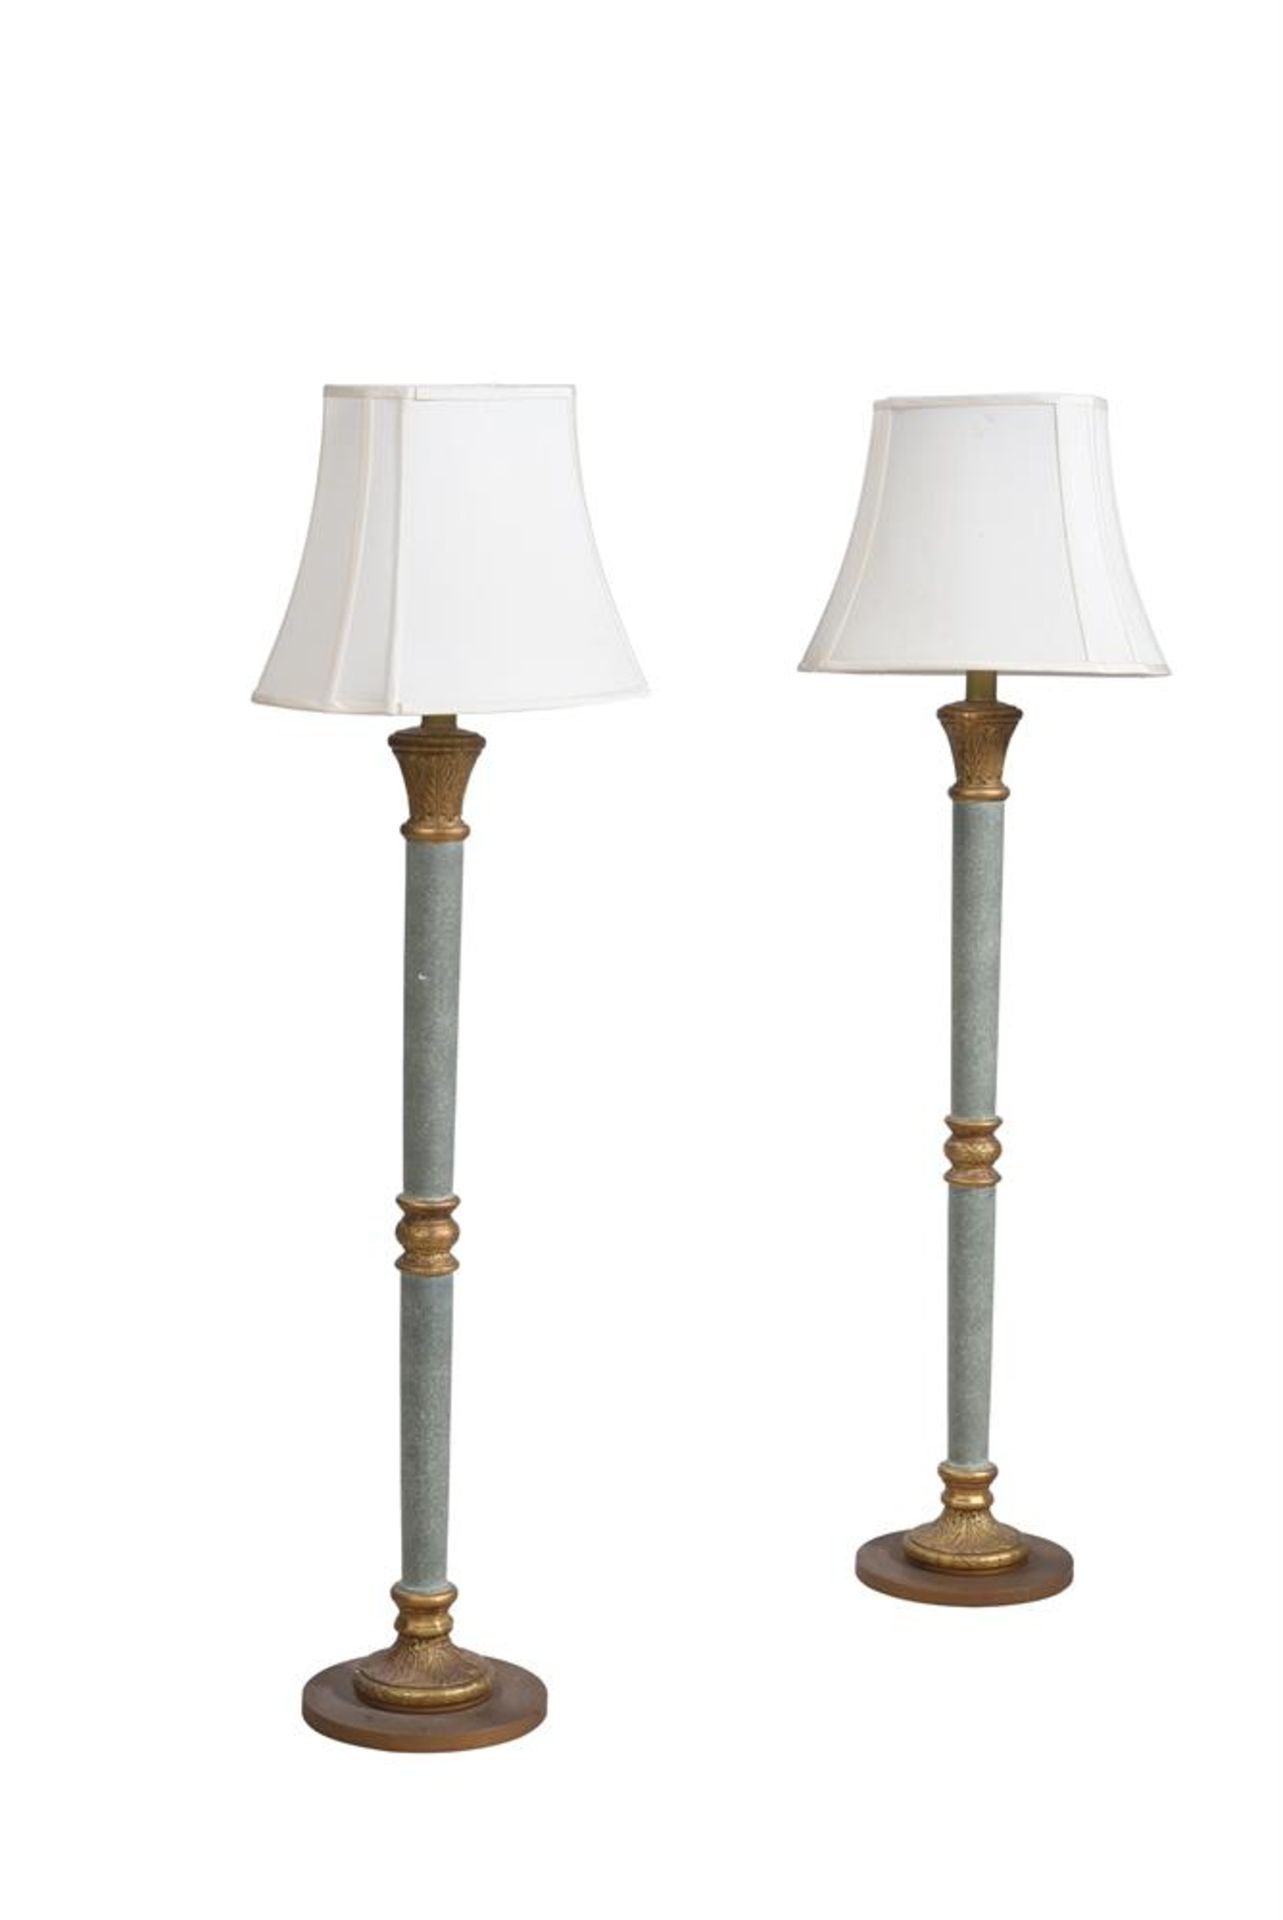 A PAIR OF GREEN AND GILT COMPOSITION STANDARD LAMPS